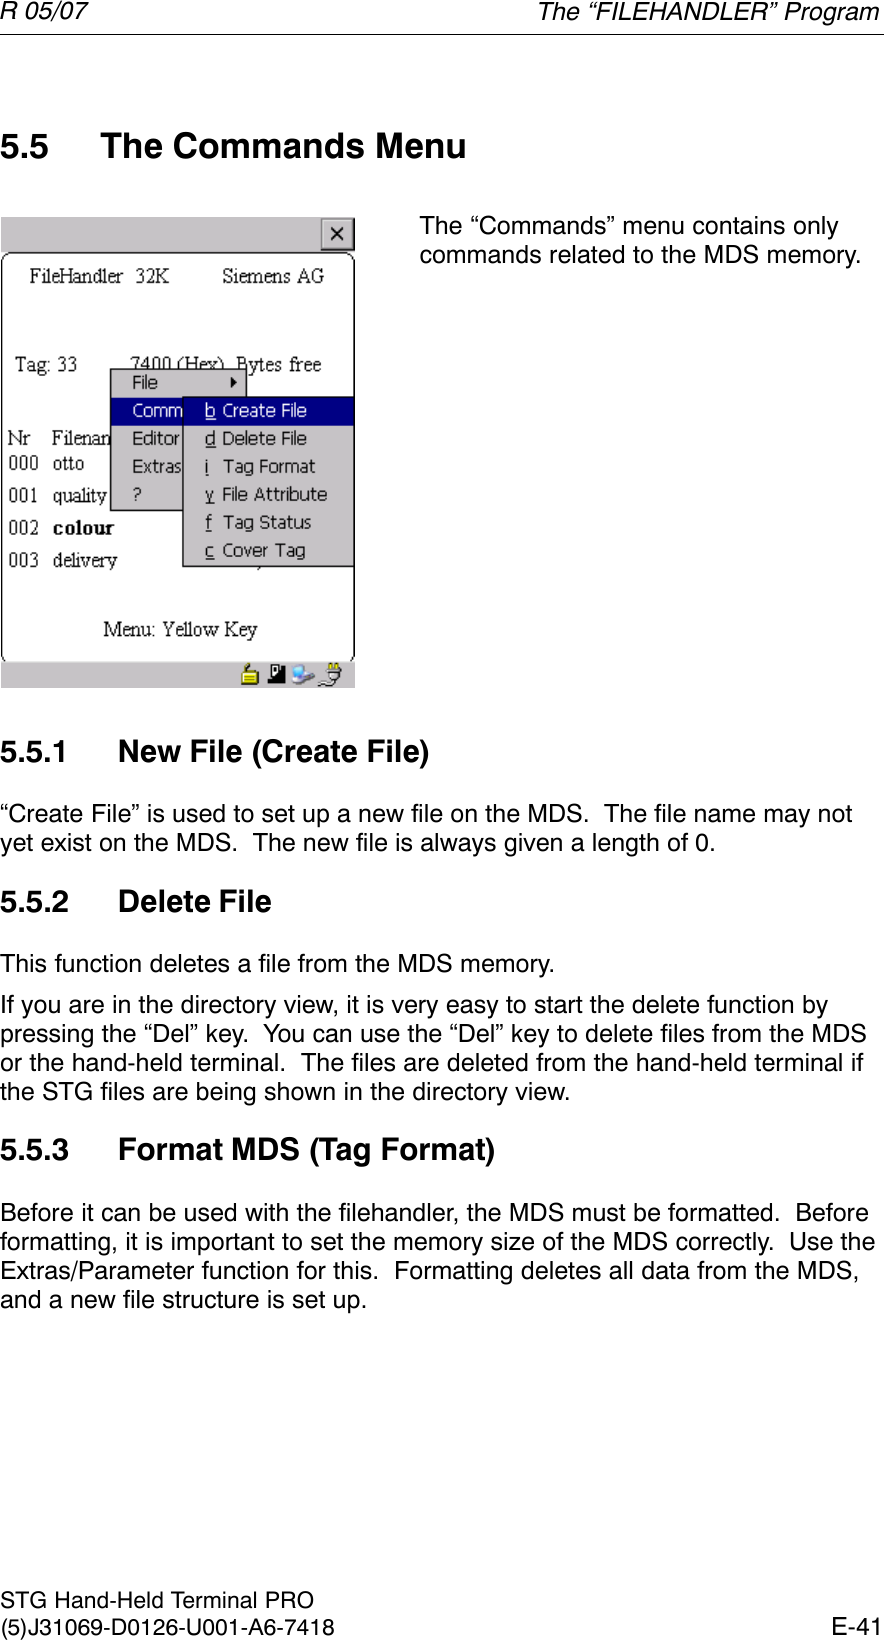 R 05/07E-41STG Hand-Held Terminal PRO(5)J31069-D0126-U001-A6-74185.5 The Commands MenuThe “Commands” menu contains onlycommands related to the MDS memory.5.5.1 New File (Create File)“Create File” is used to set up a new file on the MDS.  The file name may notyet exist on the MDS.  The new file is always given a length of 0.5.5.2 Delete FileThis function deletes a file from the MDS memory.If you are in the directory view, it is very easy to start the delete function bypressing the “Del” key.  You can use the “Del” key to delete files from the MDSor the hand-held terminal.  The files are deleted from the hand-held terminal ifthe STG files are being shown in the directory view.5.5.3 Format MDS (Tag Format)Before it can be used with the filehandler, the MDS must be formatted.  Beforeformatting, it is important to set the memory size of the MDS correctly.  Use theExtras/Parameter function for this.  Formatting deletes all data from the MDS,and a new file structure is set up.The “FILEHANDLER” Program